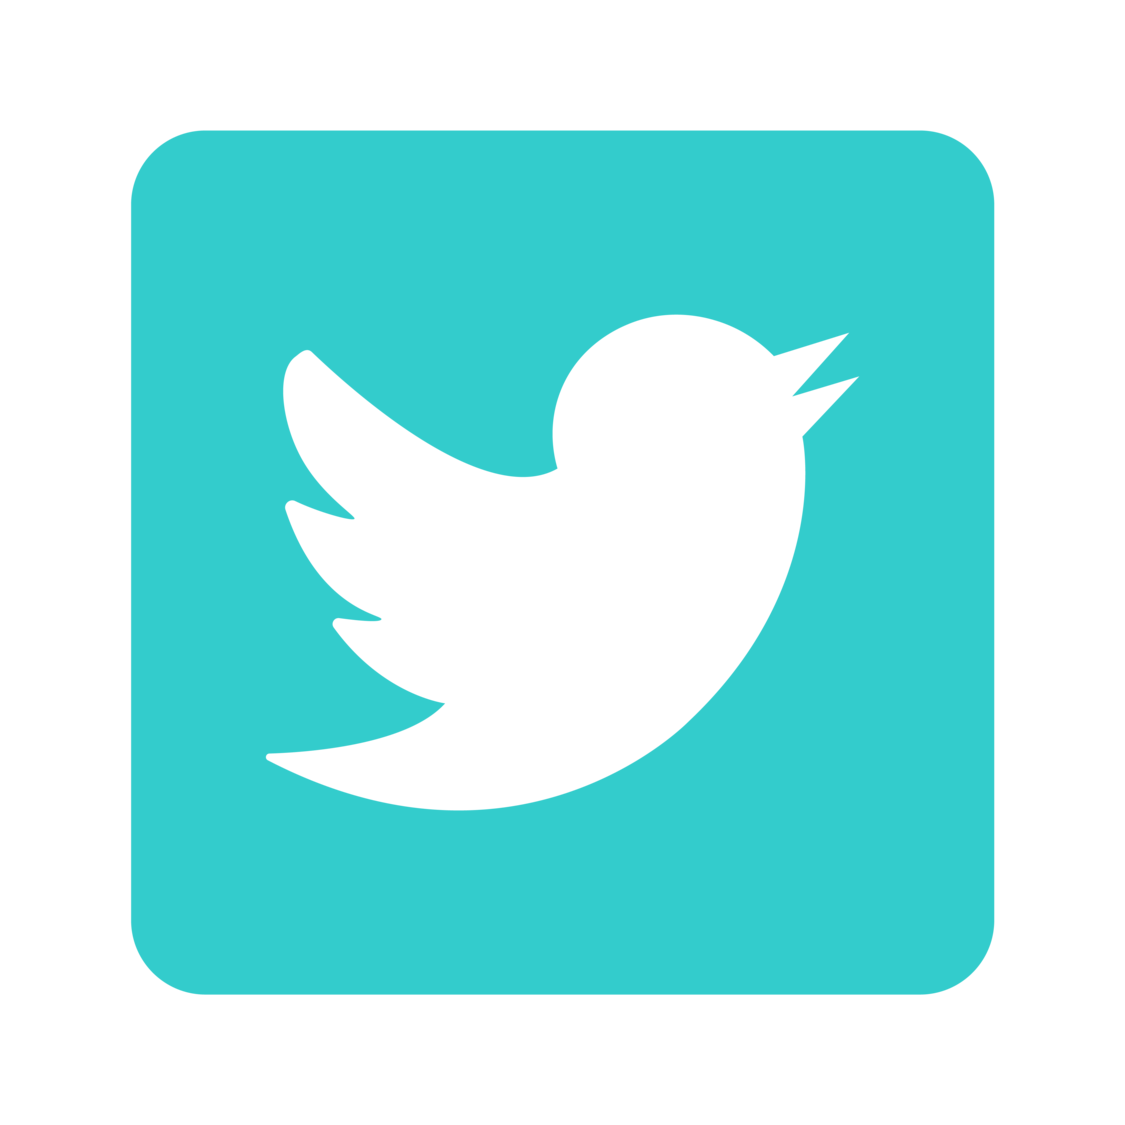 Teal Twitter Logo of bird flying to the right